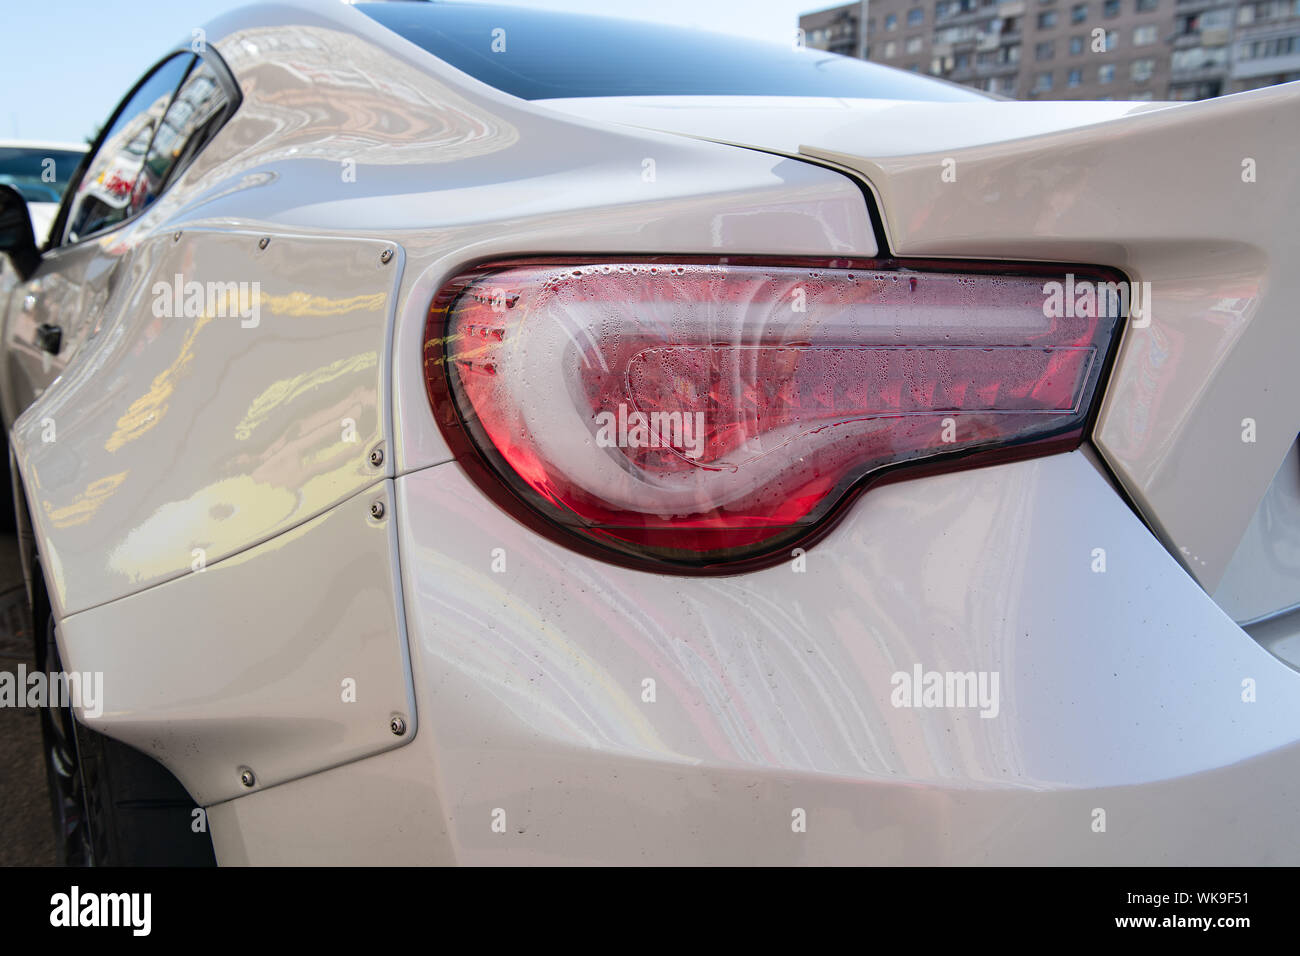 White sports car closeup. Problems with rear lights. Fogged up backlight. Condensation in taillights. Repairs needed. Stock Photo